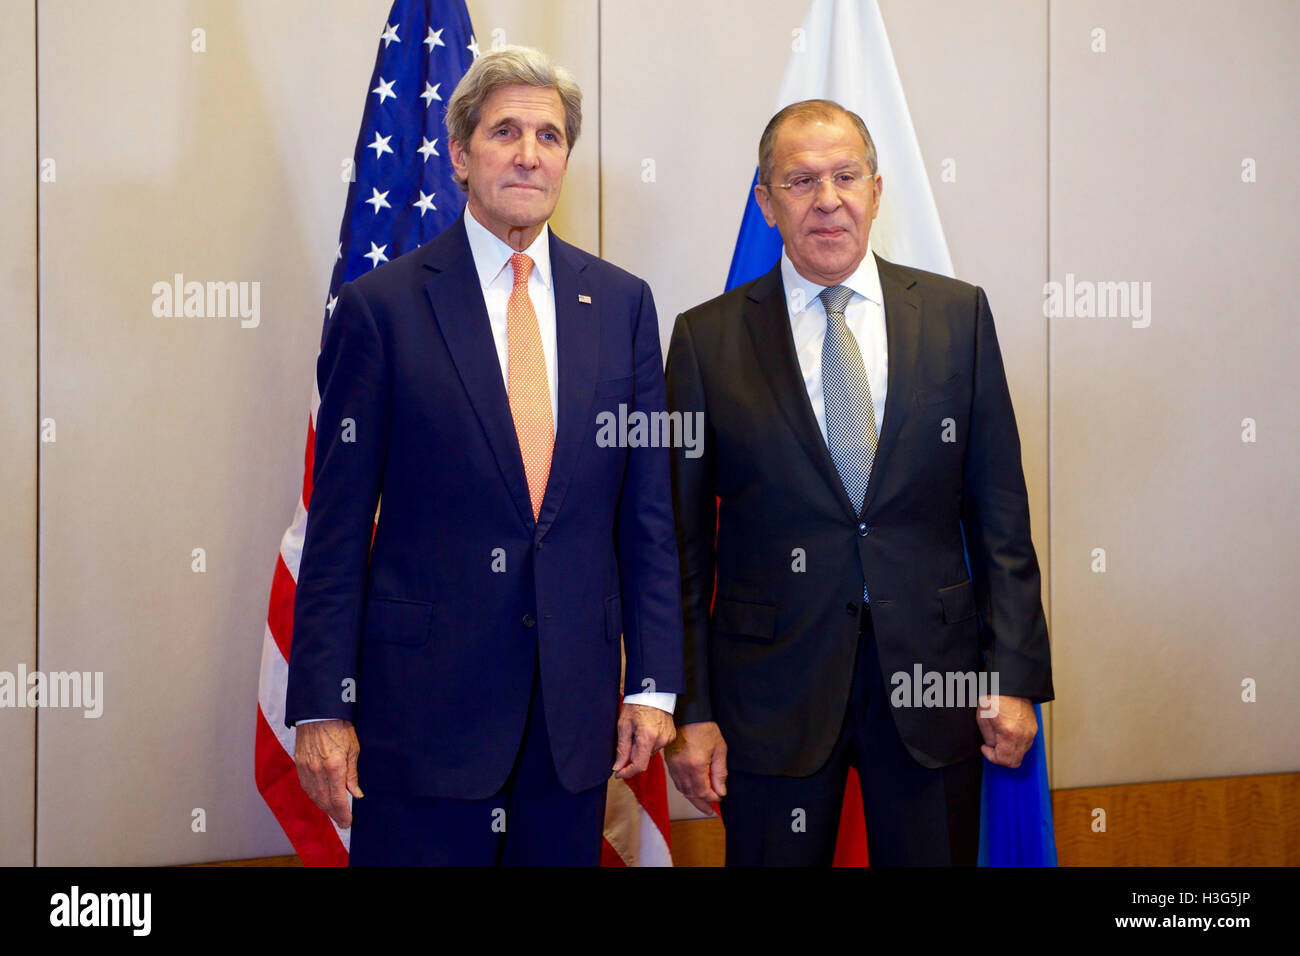 U.S. Secretary of State John Kerry stands with Russian Foreign Minister Sergey Lavrov on September 9, 2016, at the Hotel President Wilson in Geneva, Switzerland, before they begin a bilateral meeting focused on Syria. Stock Photo